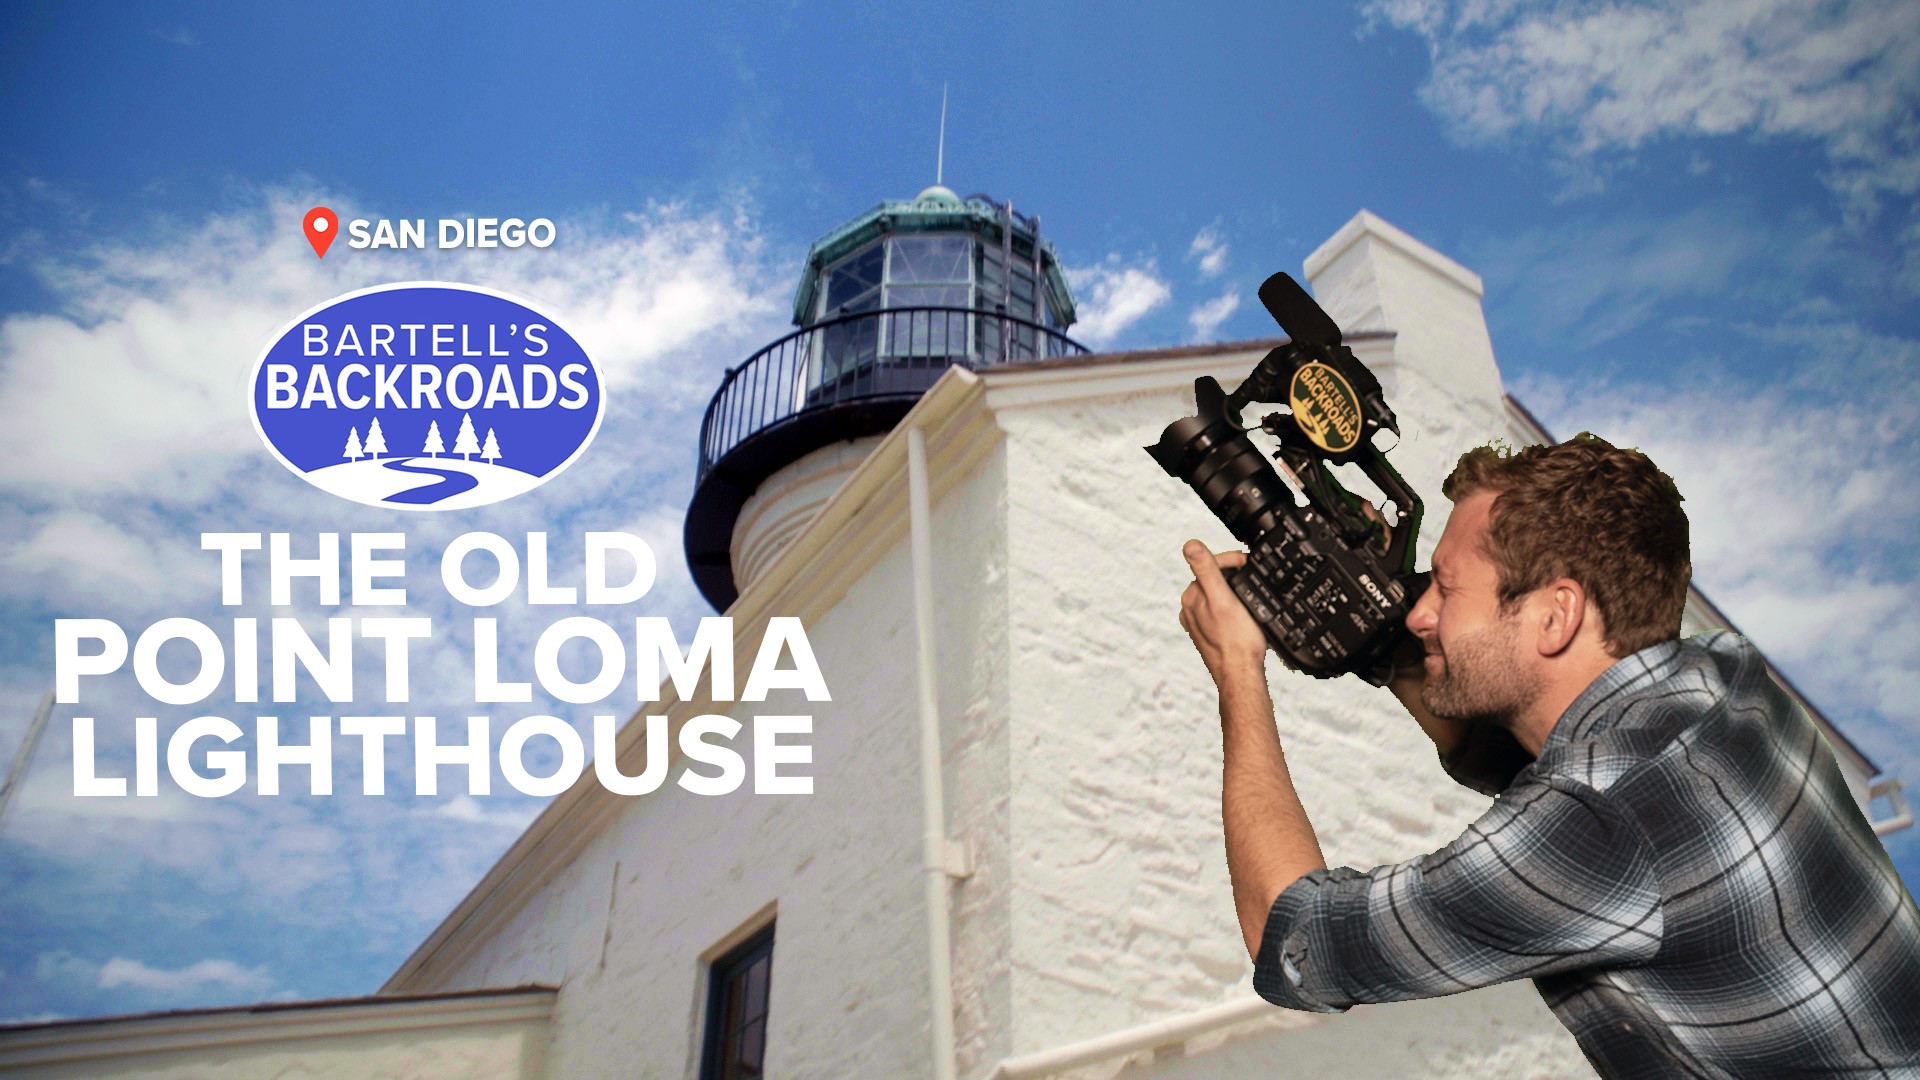 The lonely life of a lighthouse keeper and why the Old Point Loma Lighthouse was decommissioned.